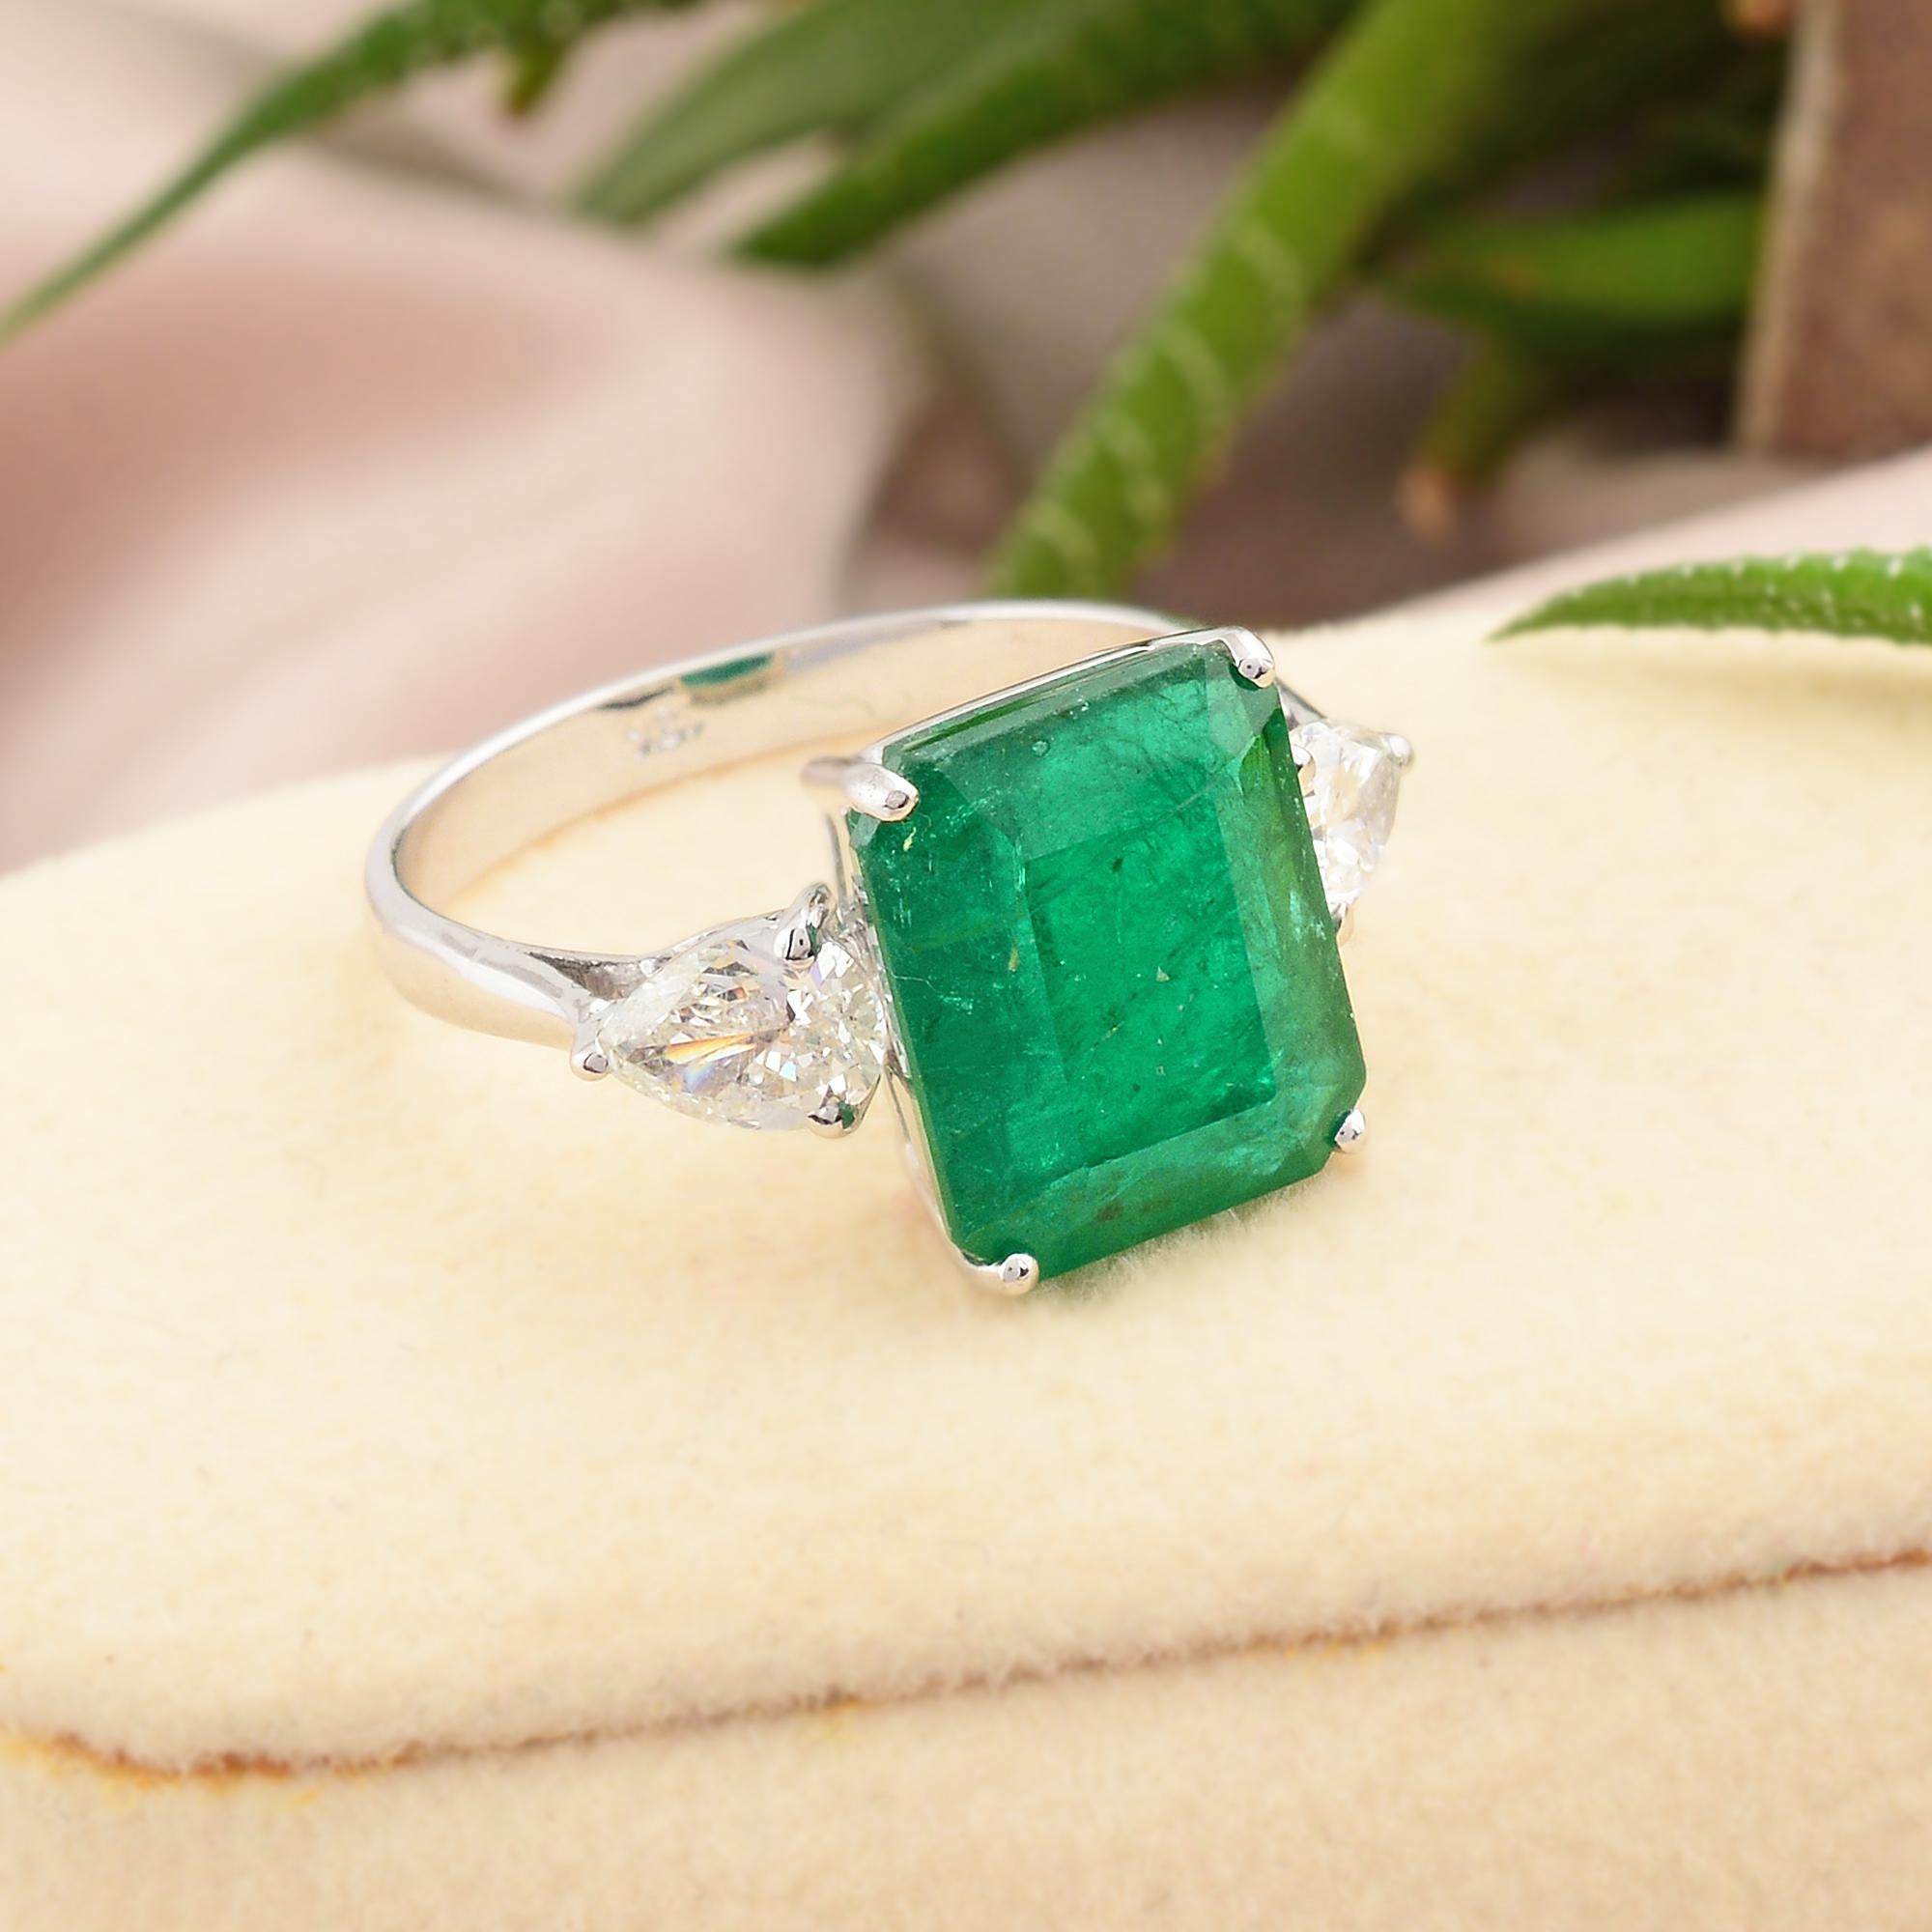 For Sale:  Natural Emerald Gemstone Cocktail Ring Diamond 18k White Gold Handmade Jewelry 2